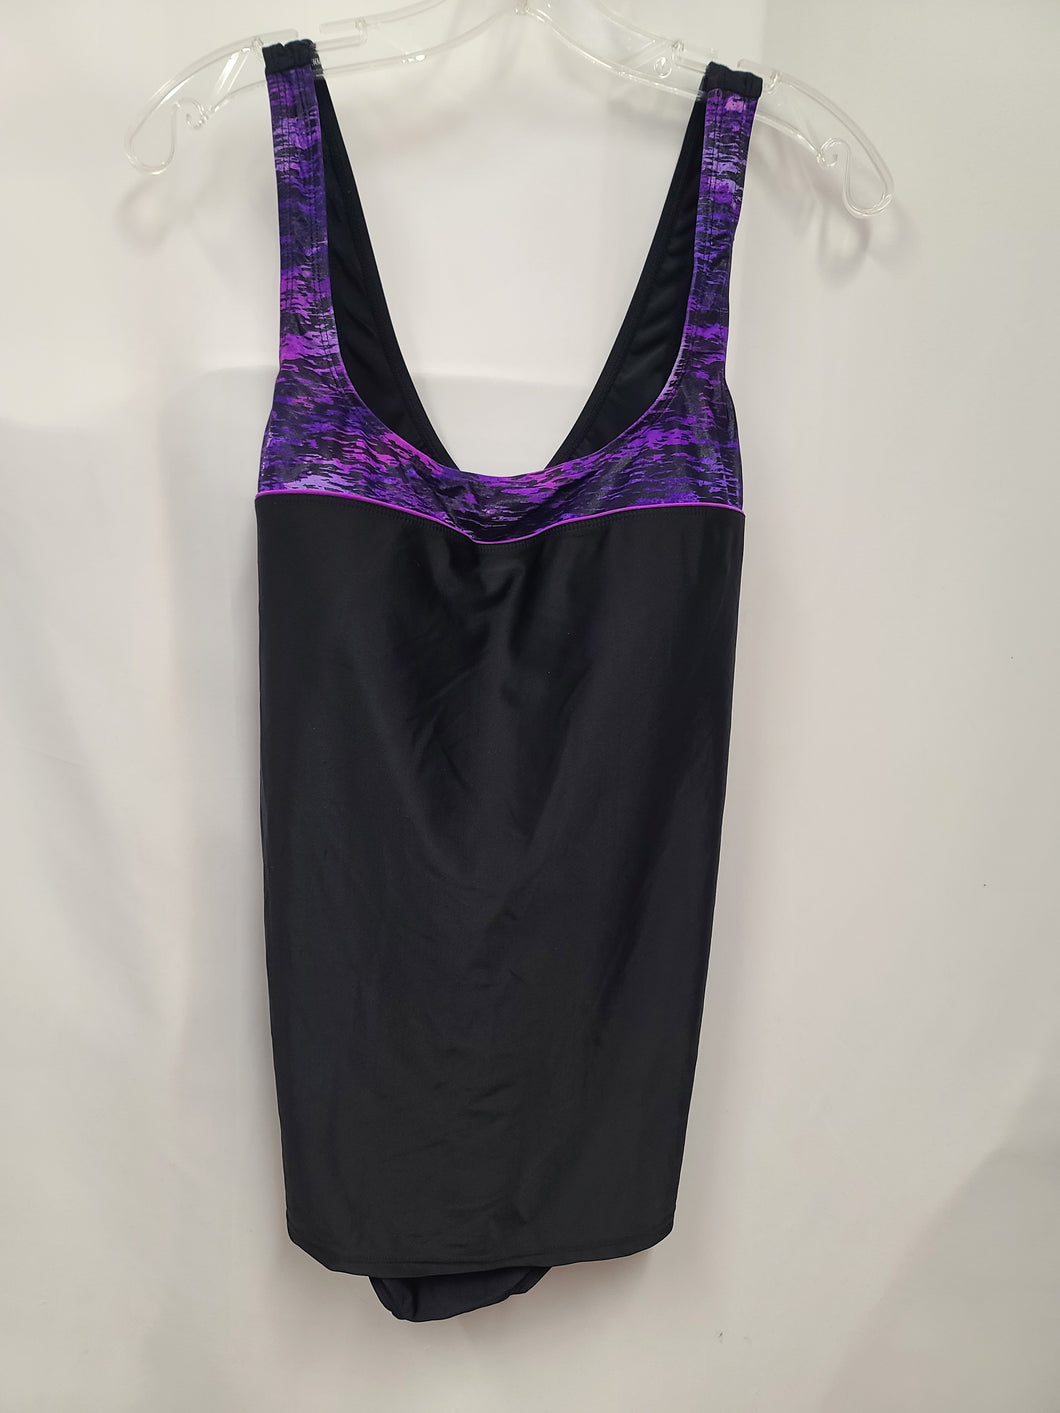 23-1077, Maillot, 2x